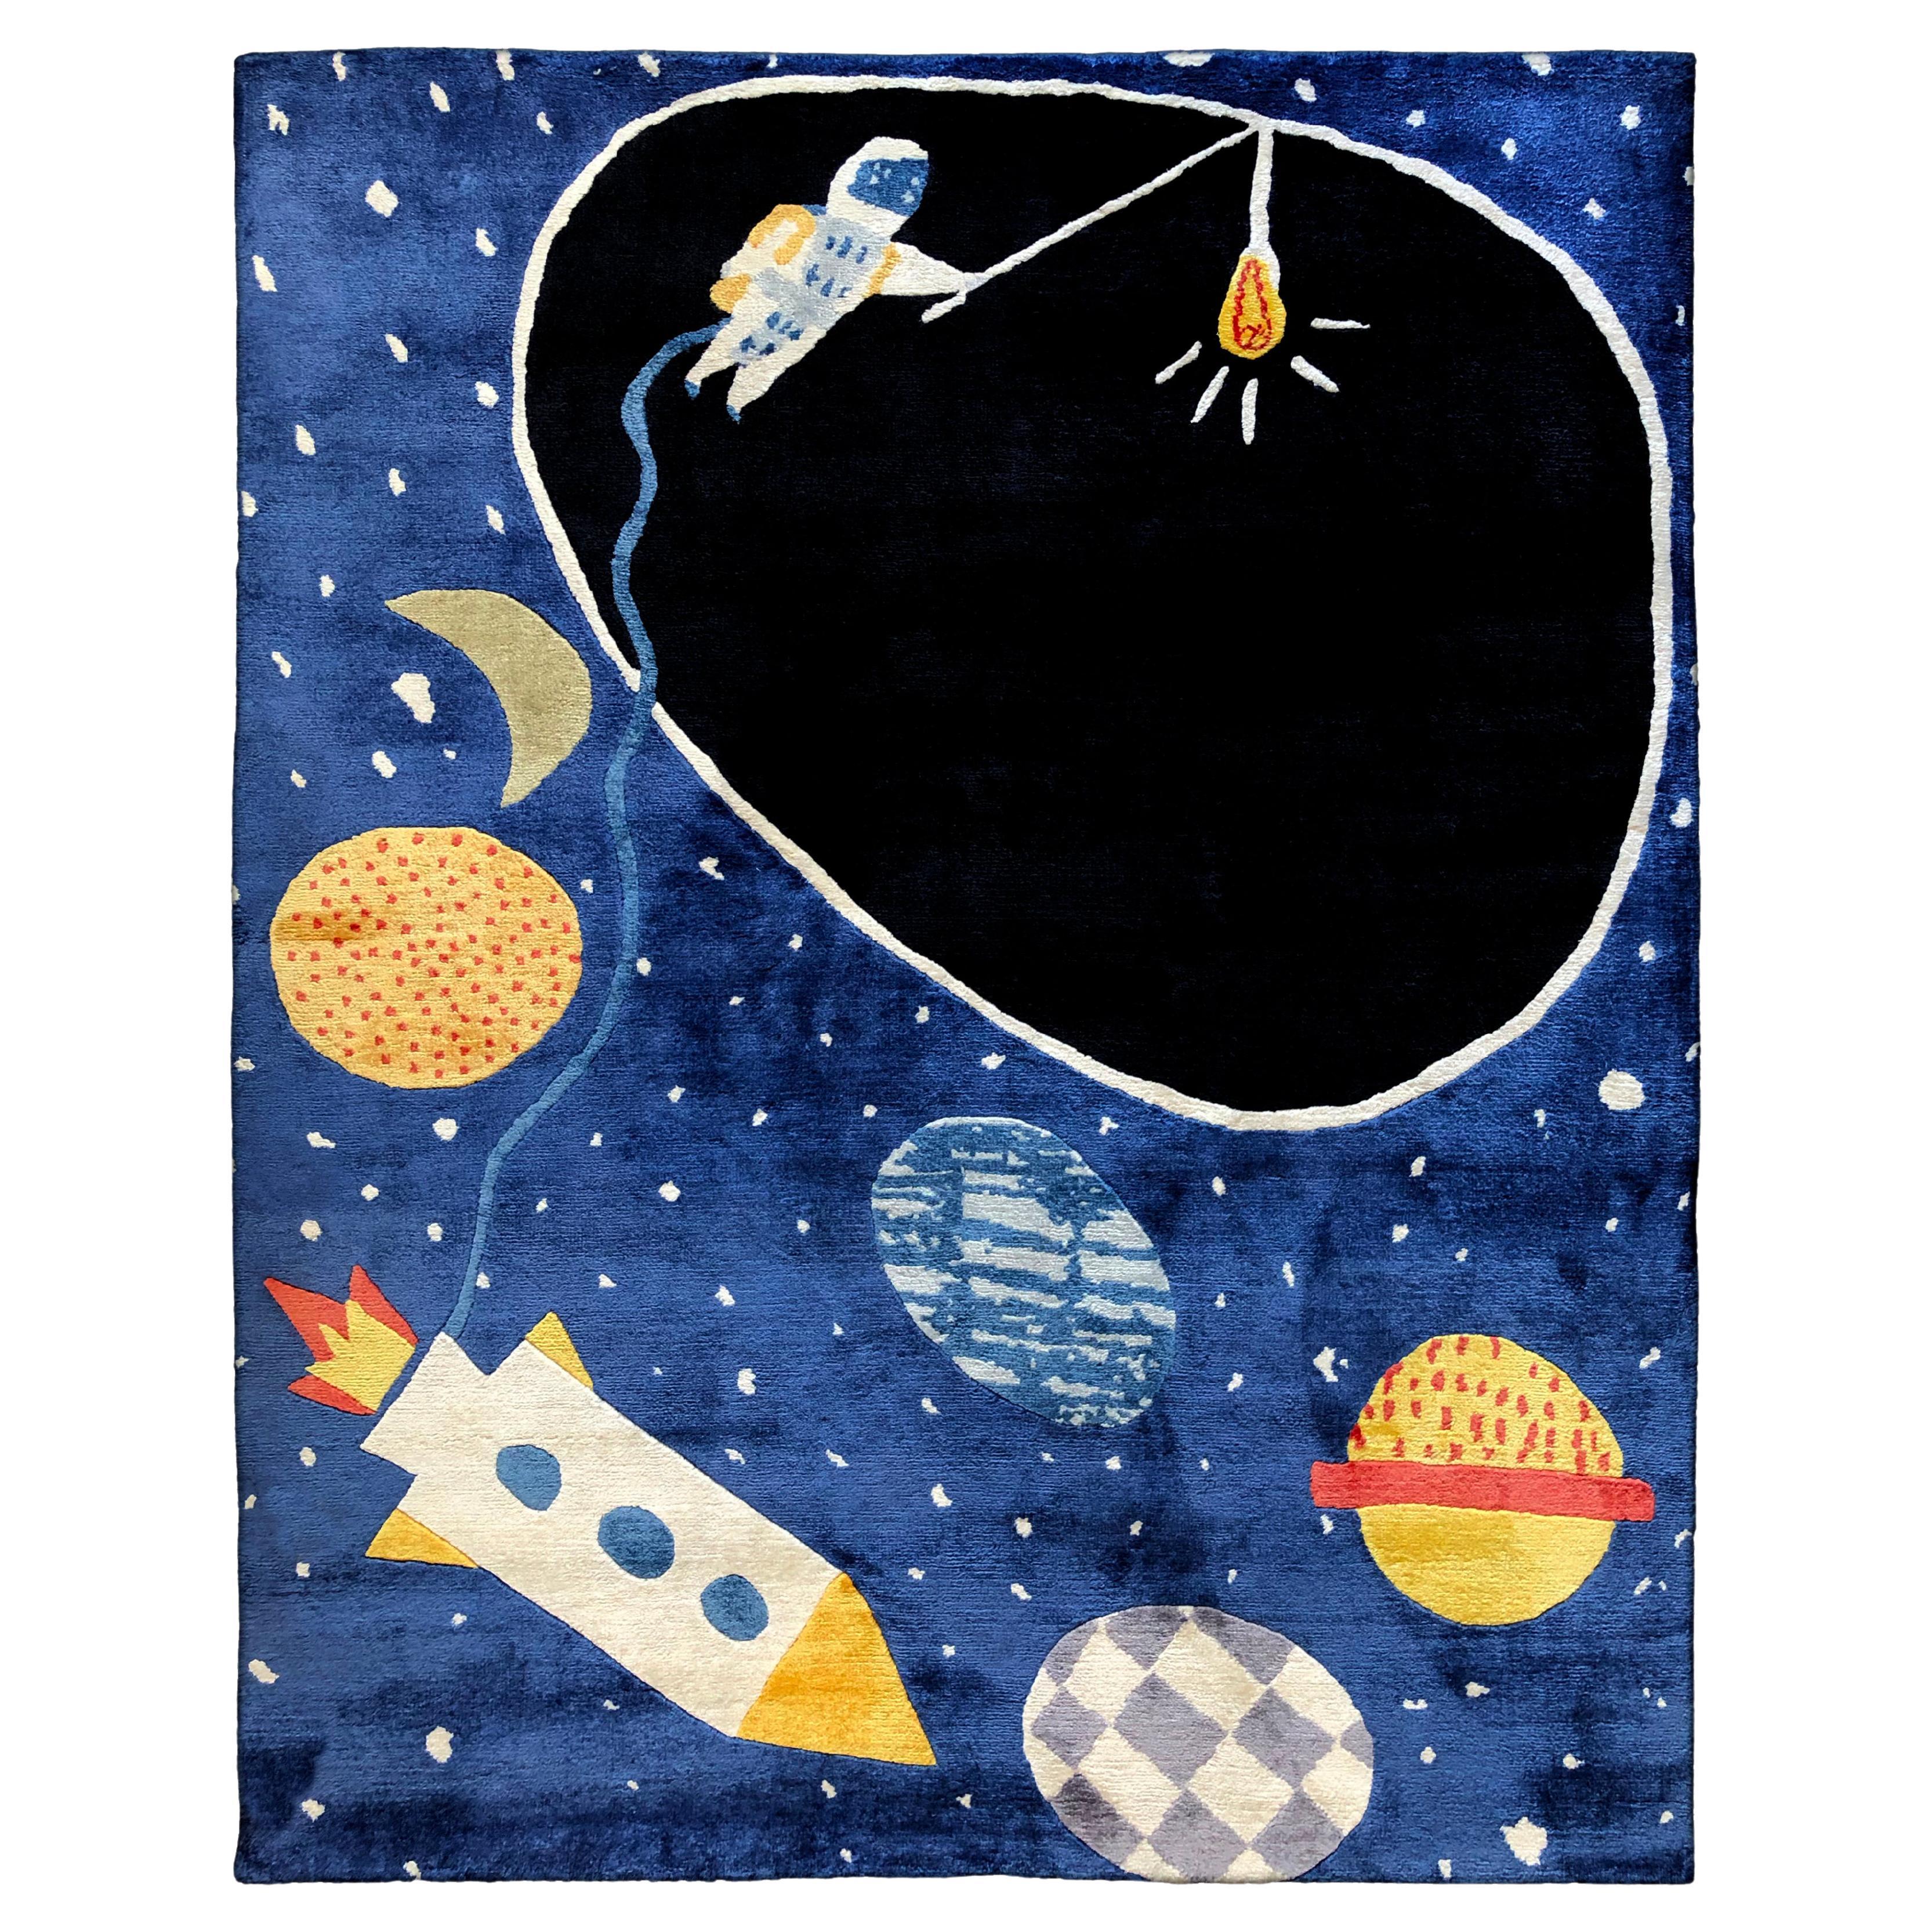 Space Ace Rug by Daria Solak, Hand Knotted, 100% New Zealand Wool 200x250cm